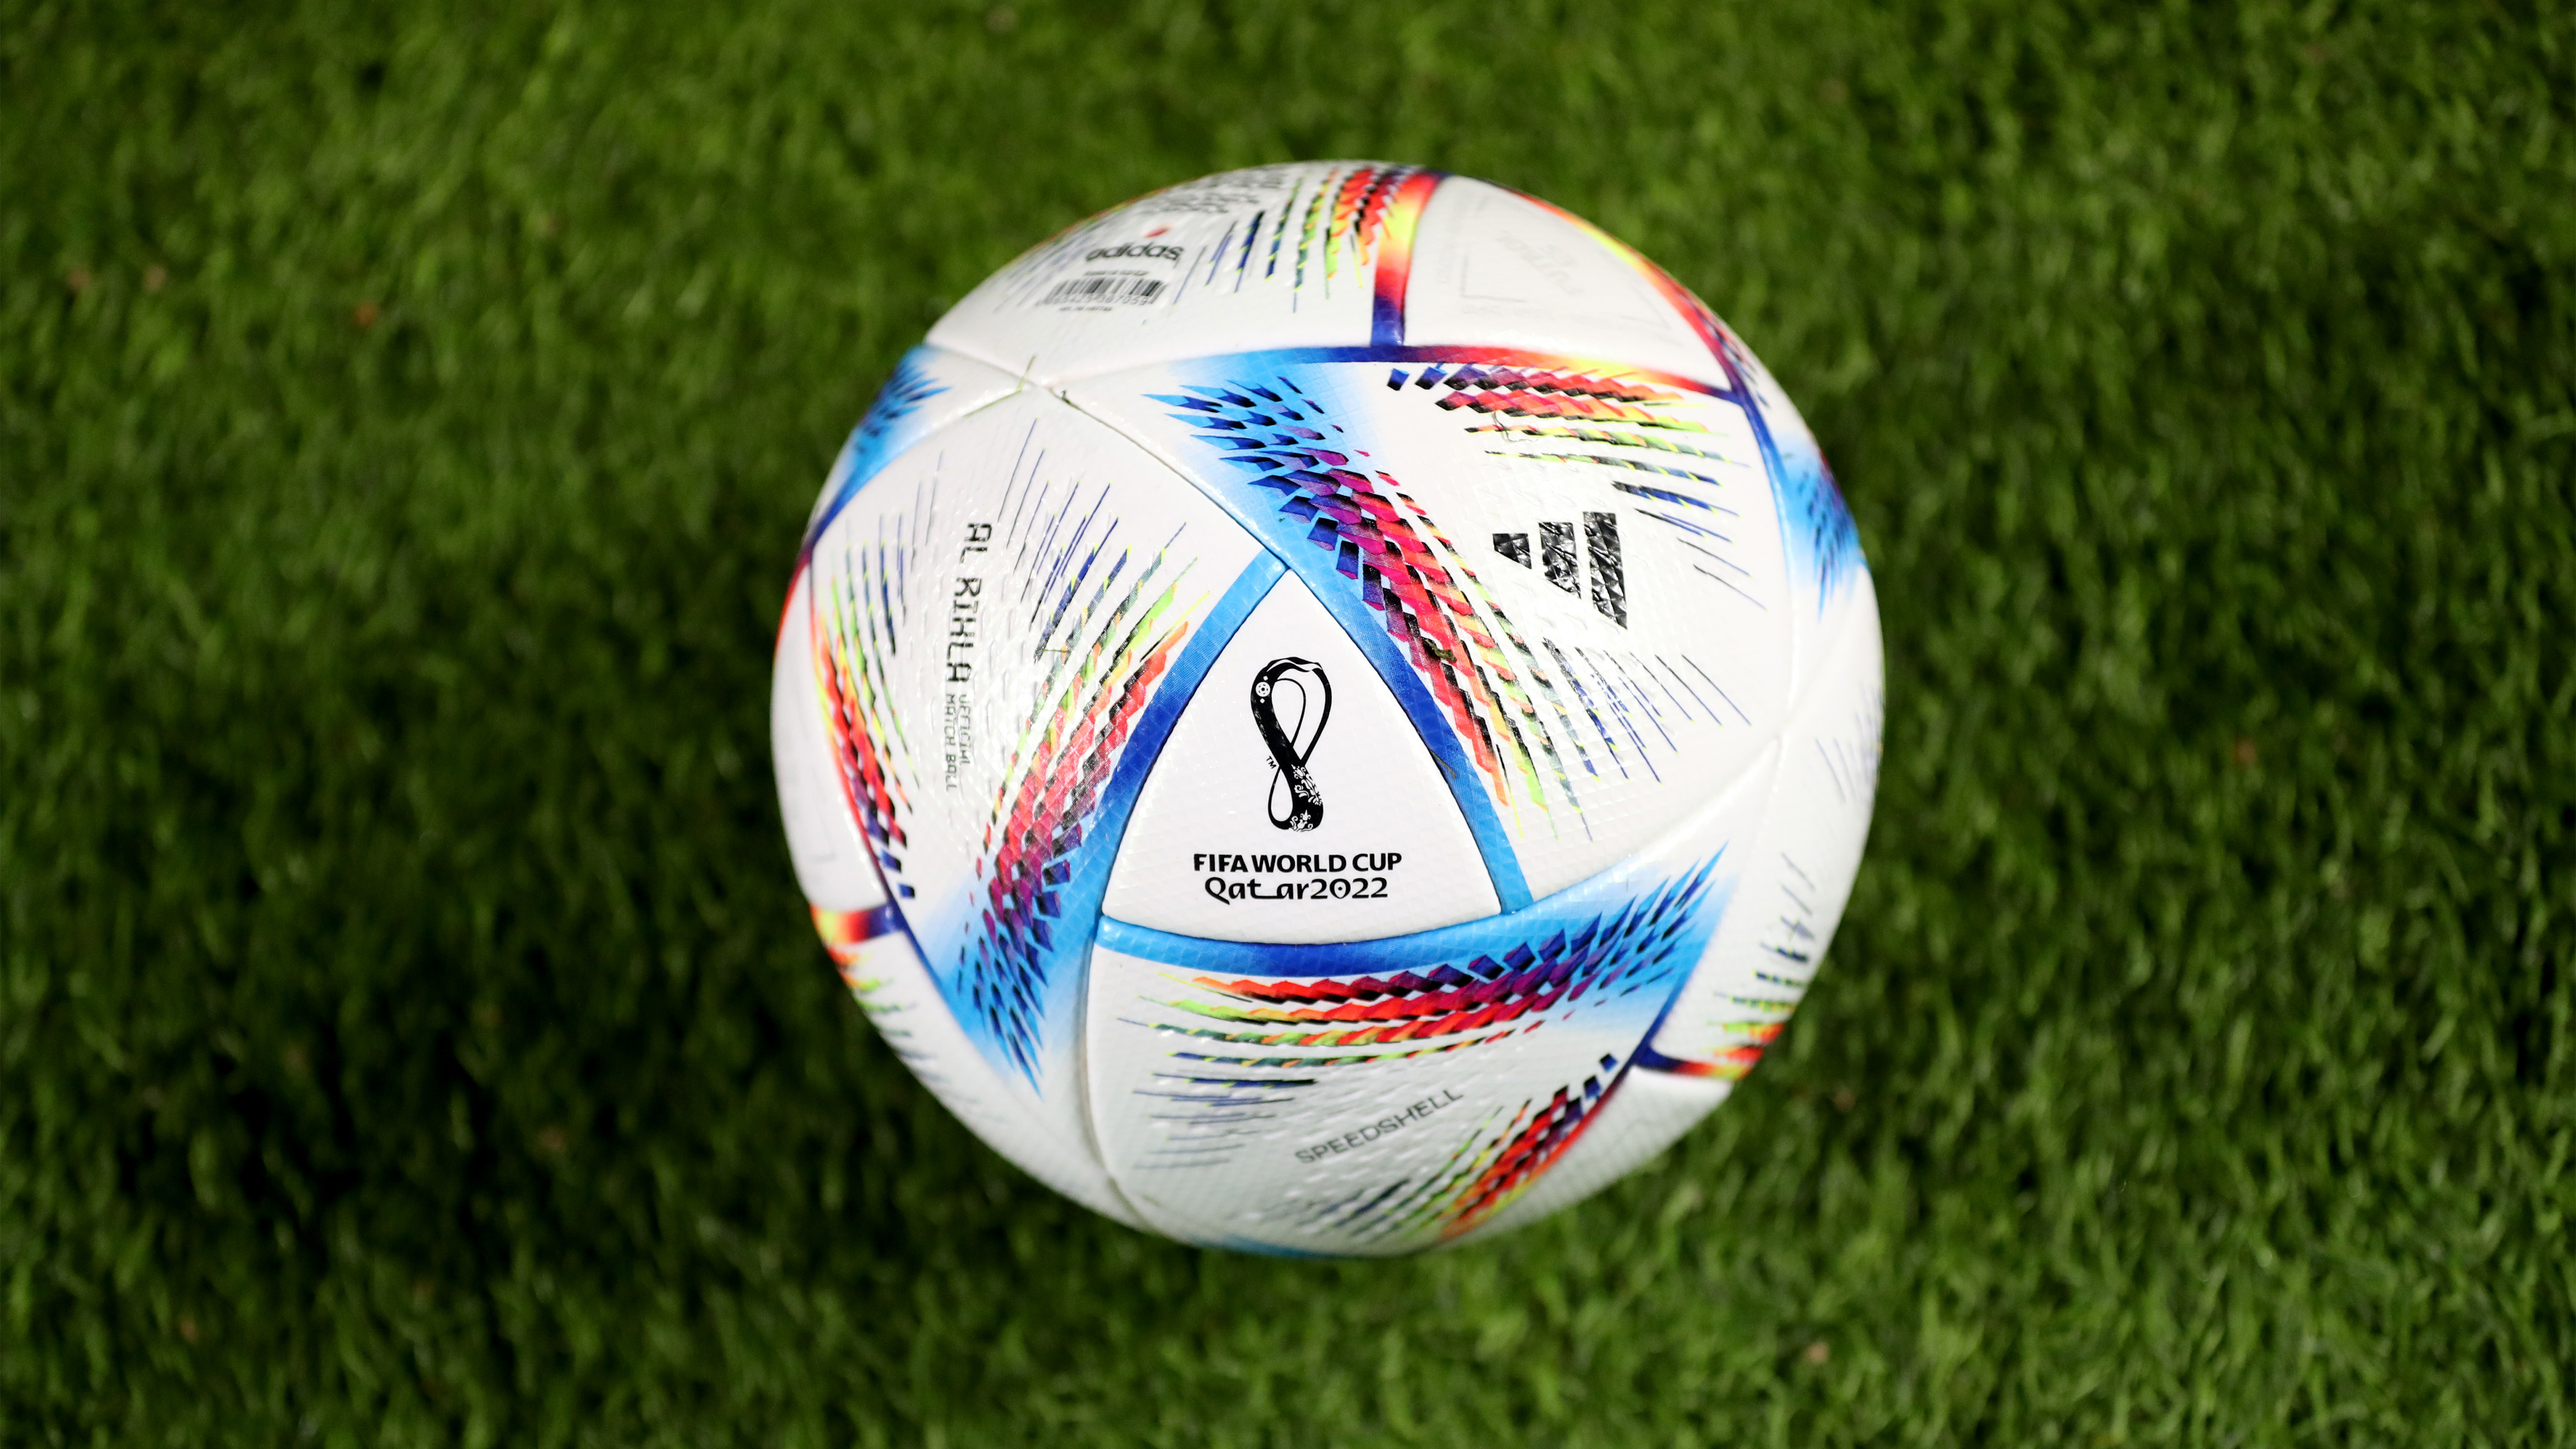 VIDEO: From Telstar to Brazuca - The Evolution of FIFA World Cup Balls